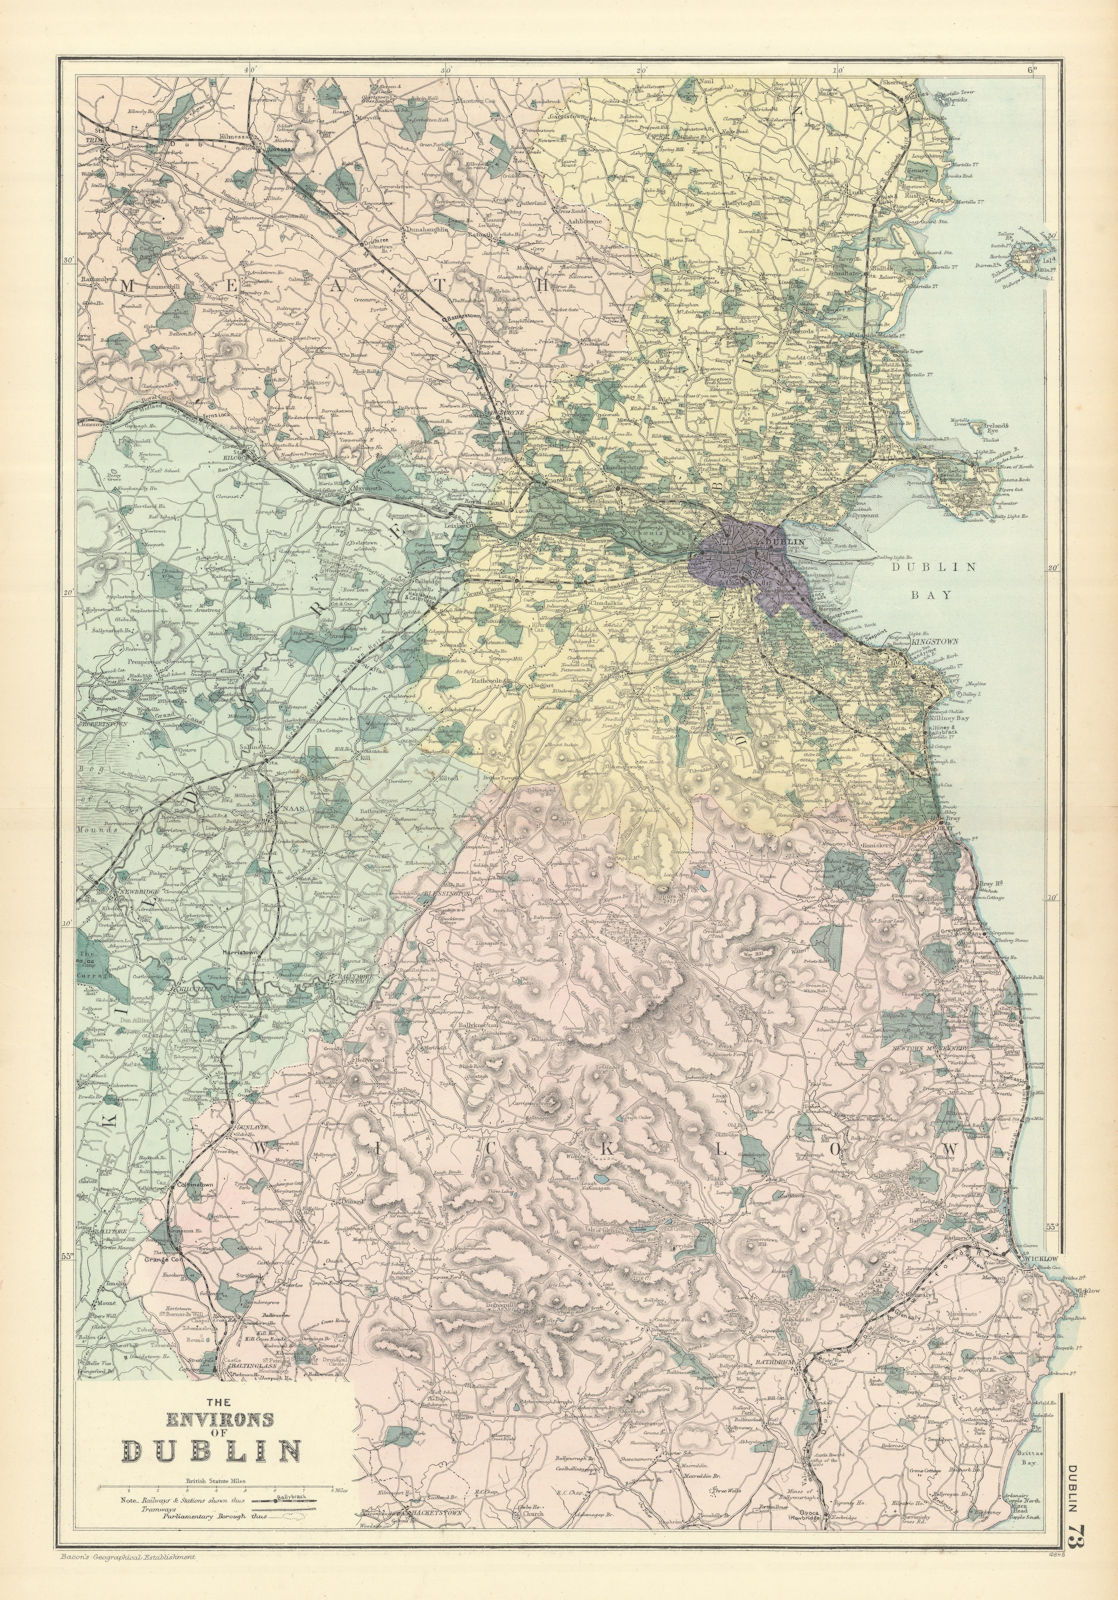 Associate Product DUBLIN & ENVIRONS Meath Kildare Wicklow IRELAND antique map by GW BACON 1898